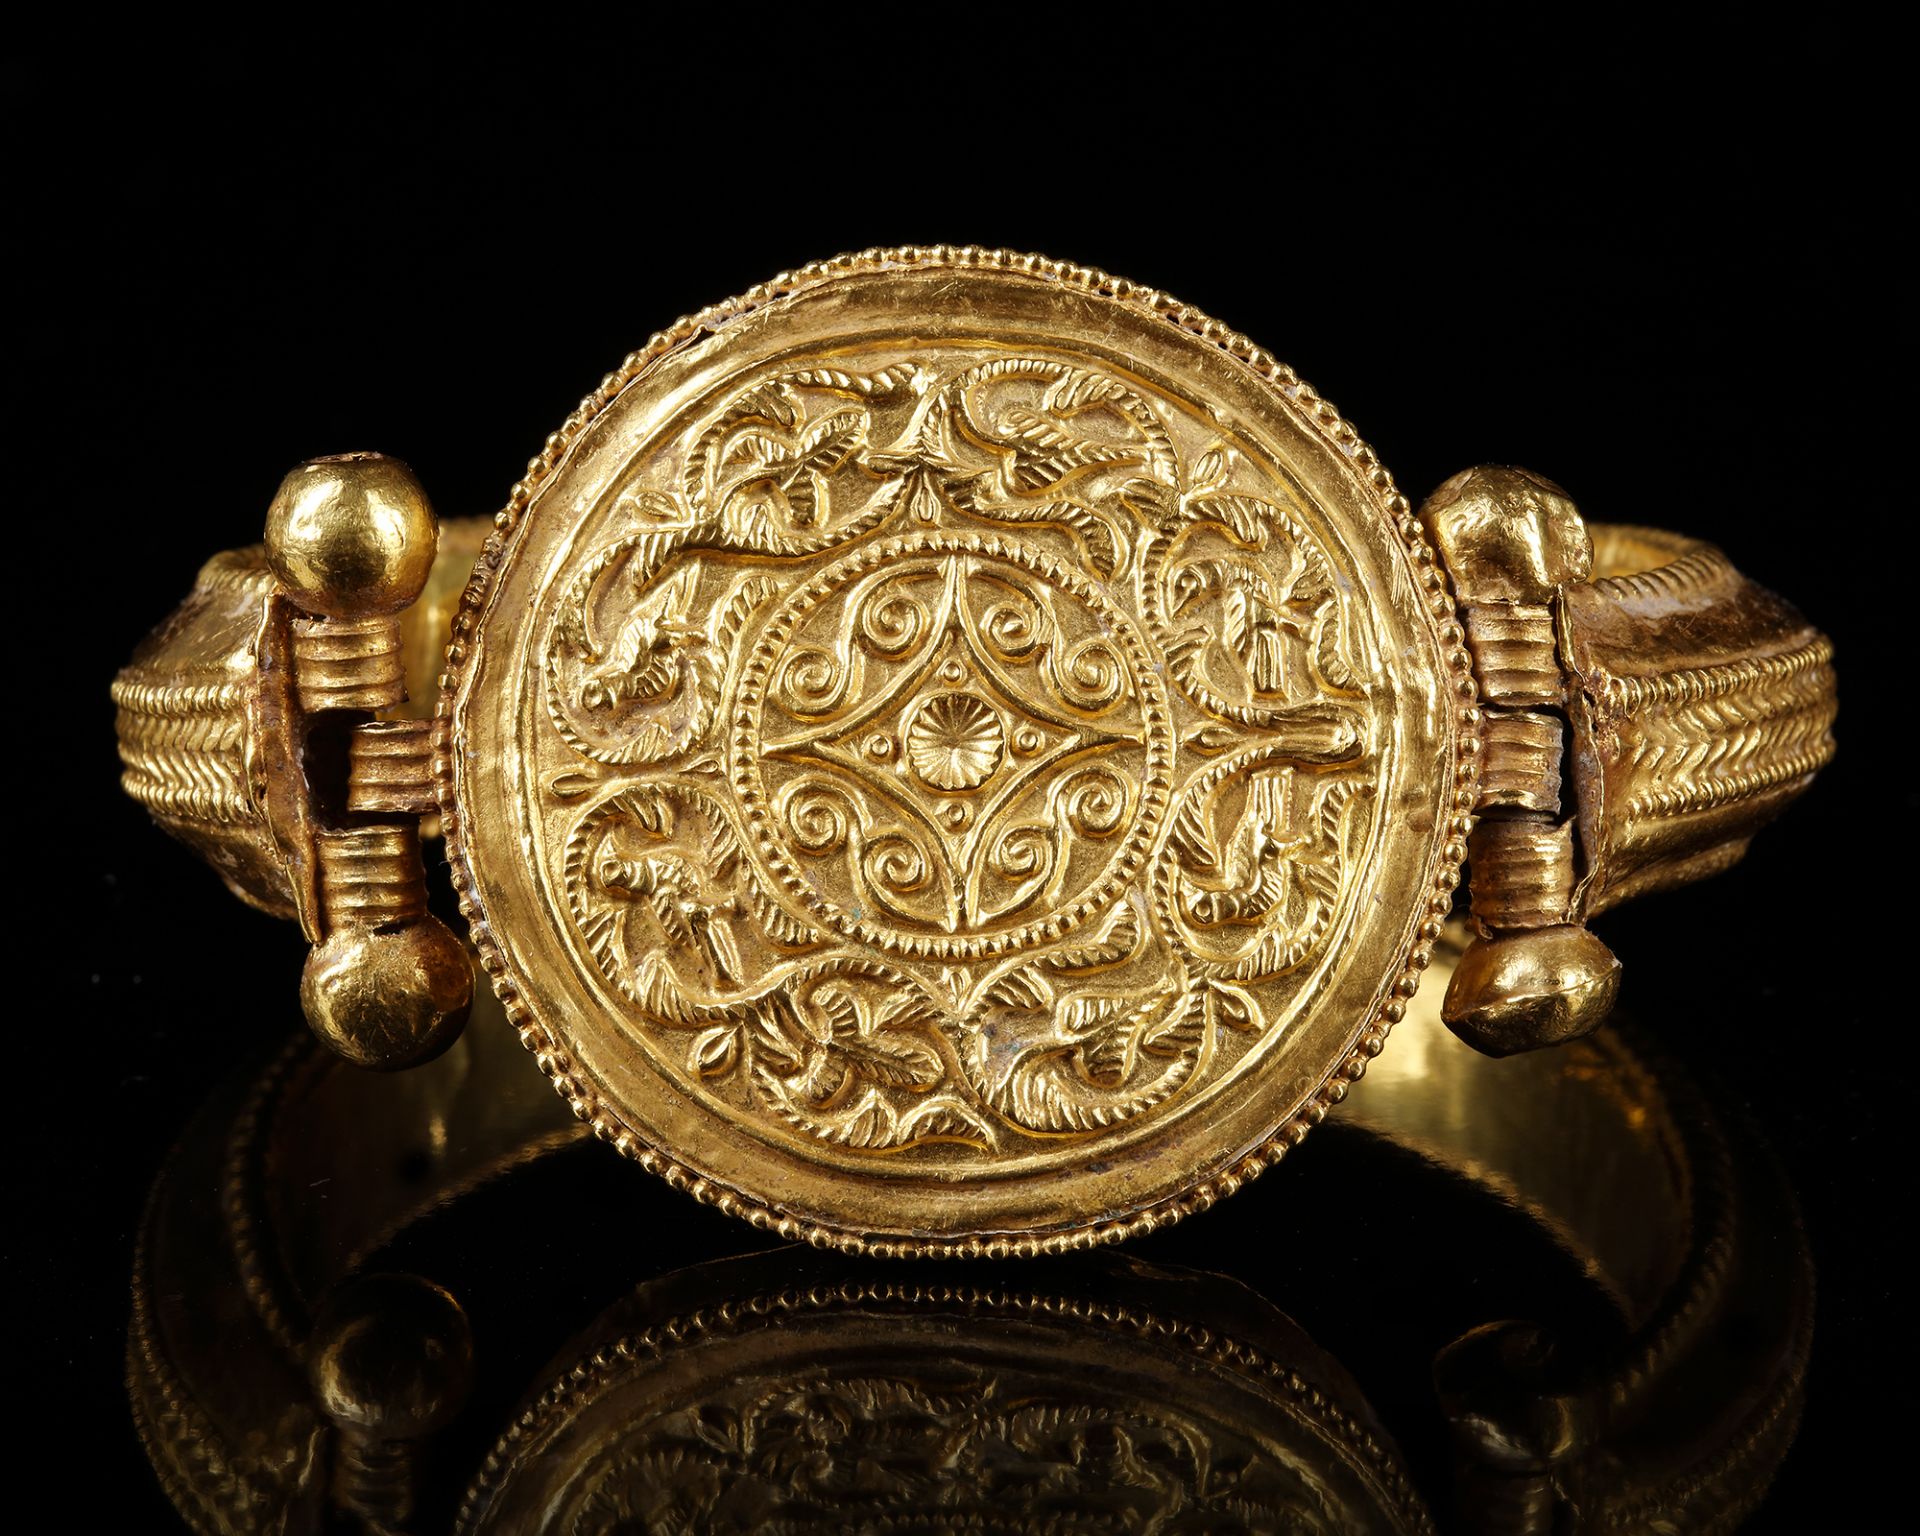 A RARE PAIR OF A FATIMID GOLD BRACELETS, POSSIBLY SYRIA, 11TH CENTURY - Image 9 of 14